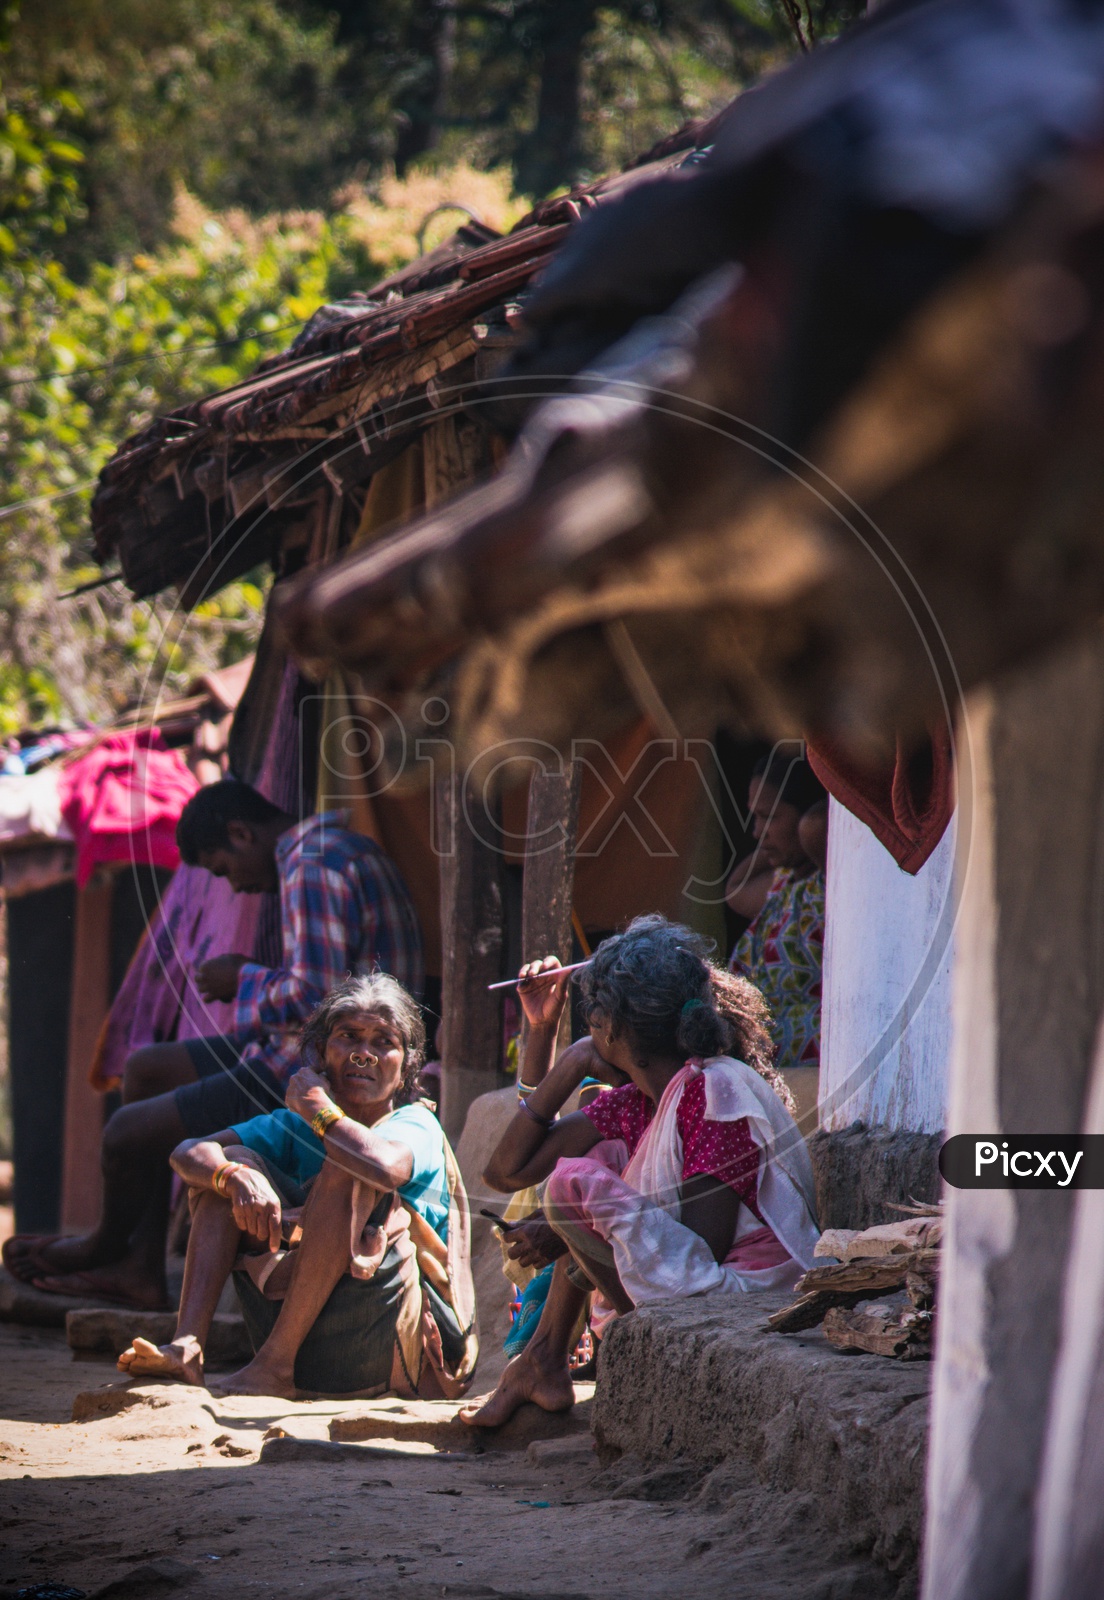 Tribal Woman Sitting On the Streets Of a Tribal Village